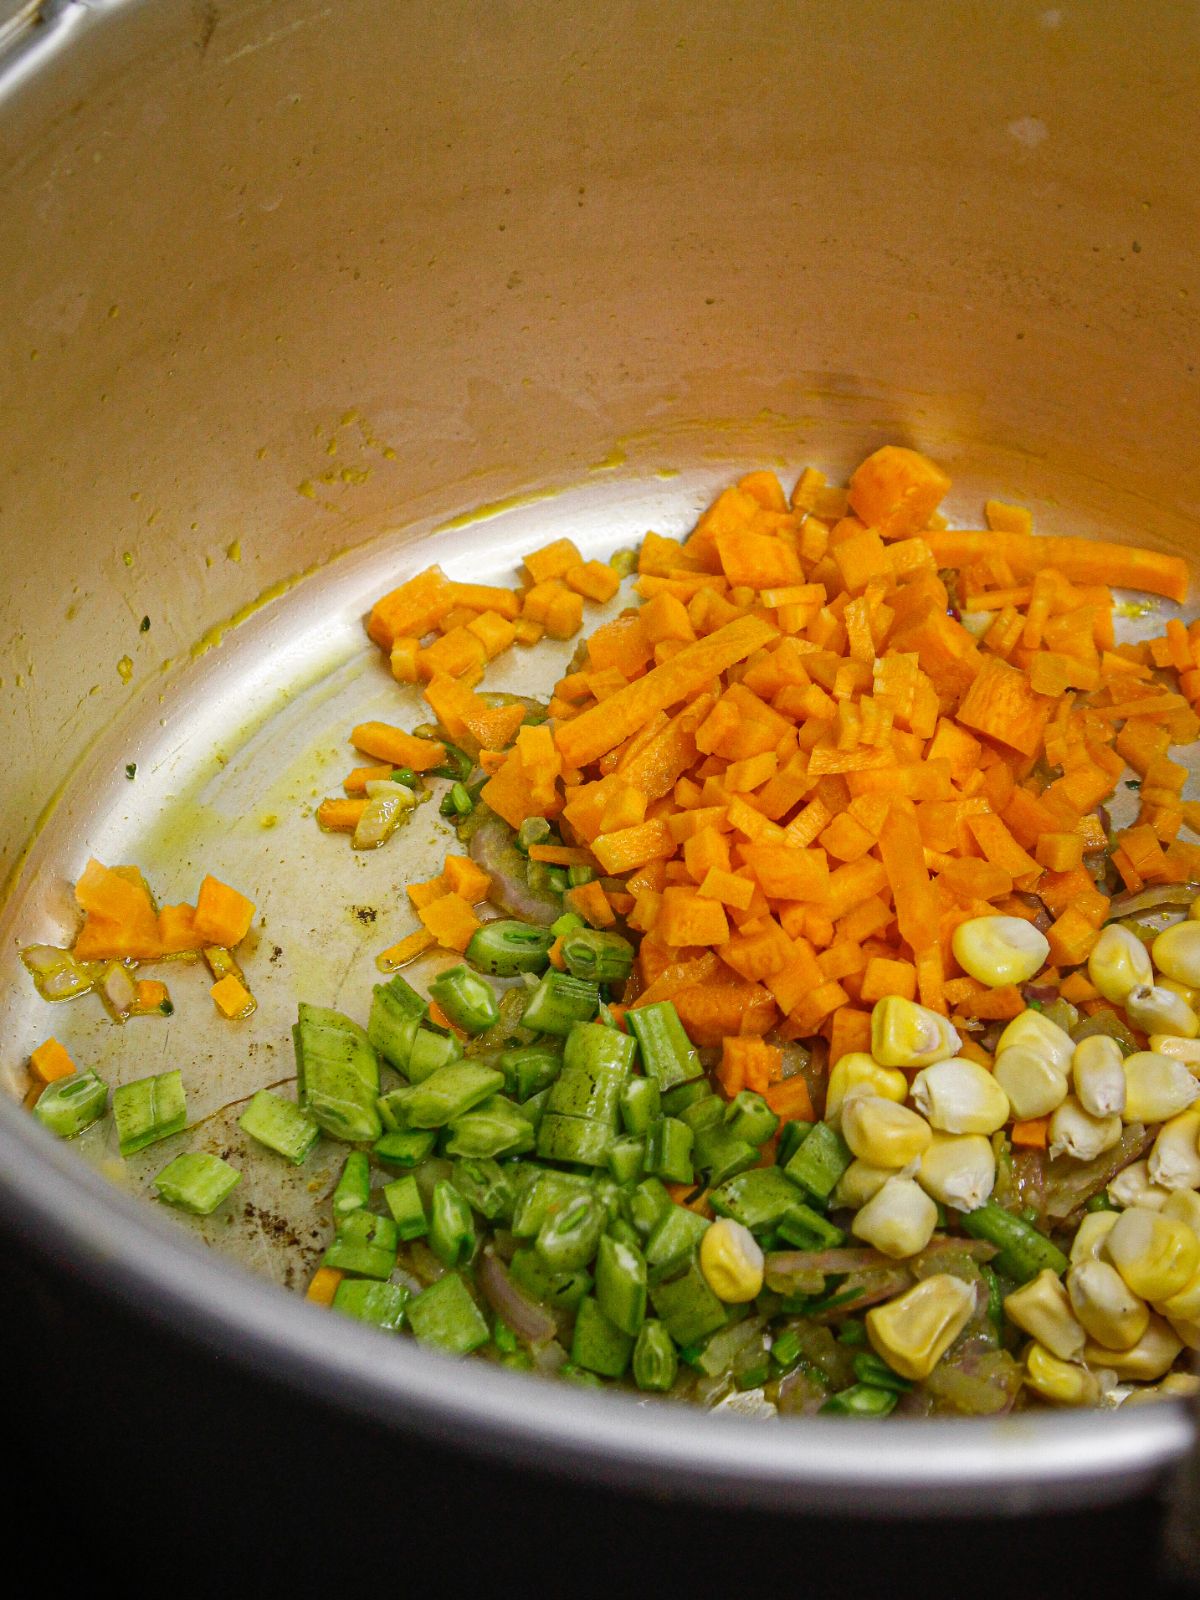 Add other vegetables to the pot nd mix well